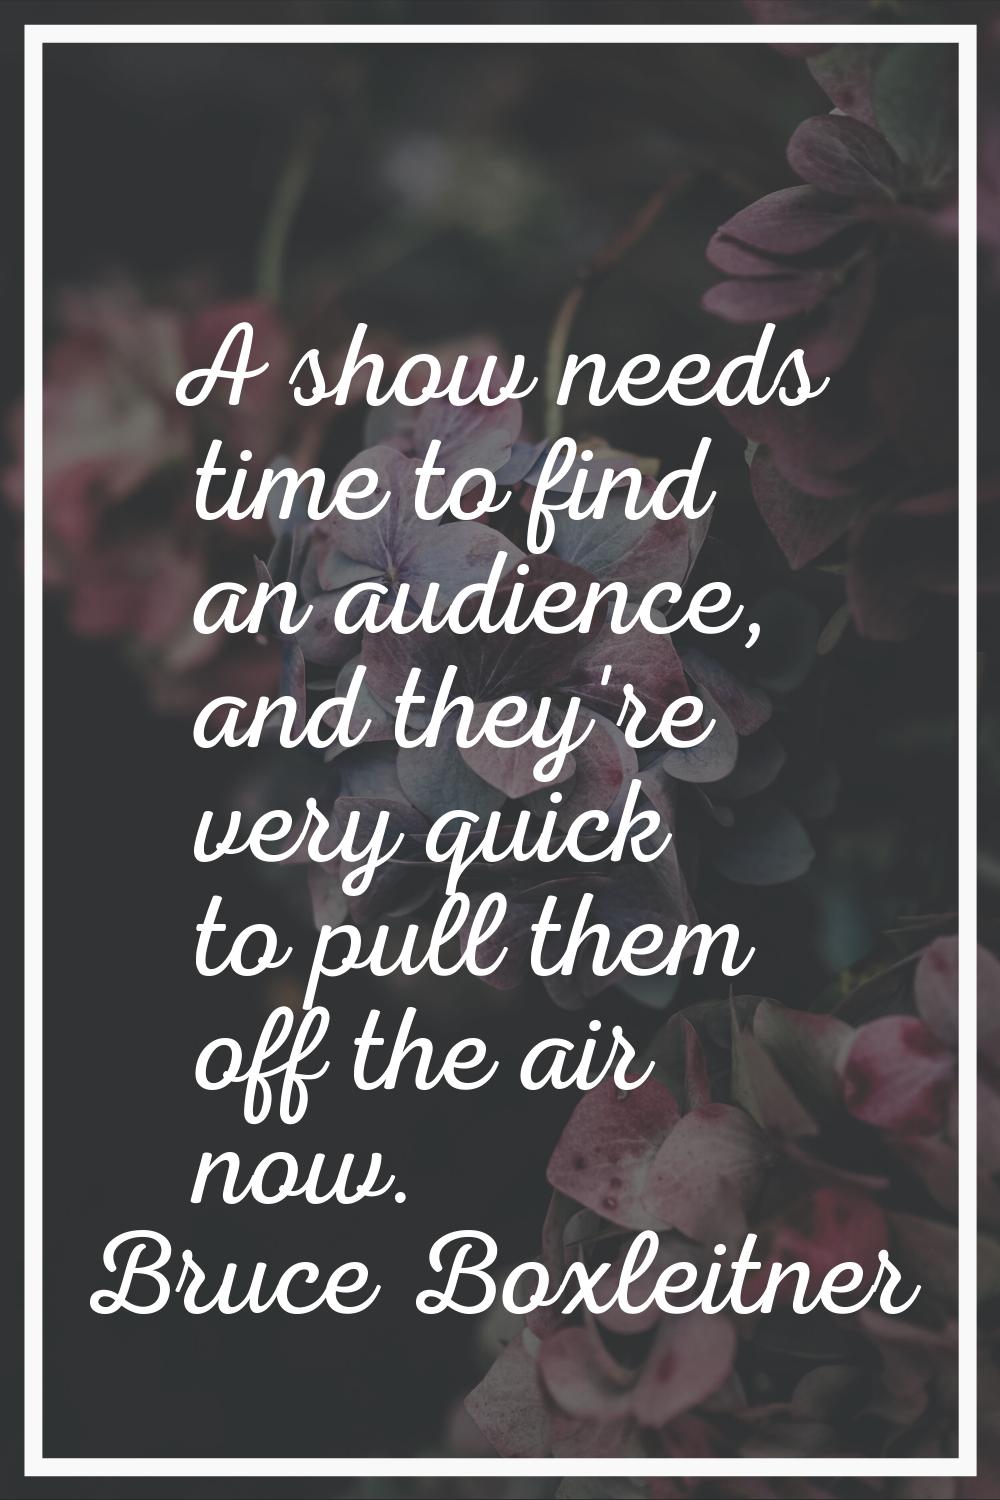 A show needs time to find an audience, and they're very quick to pull them off the air now.